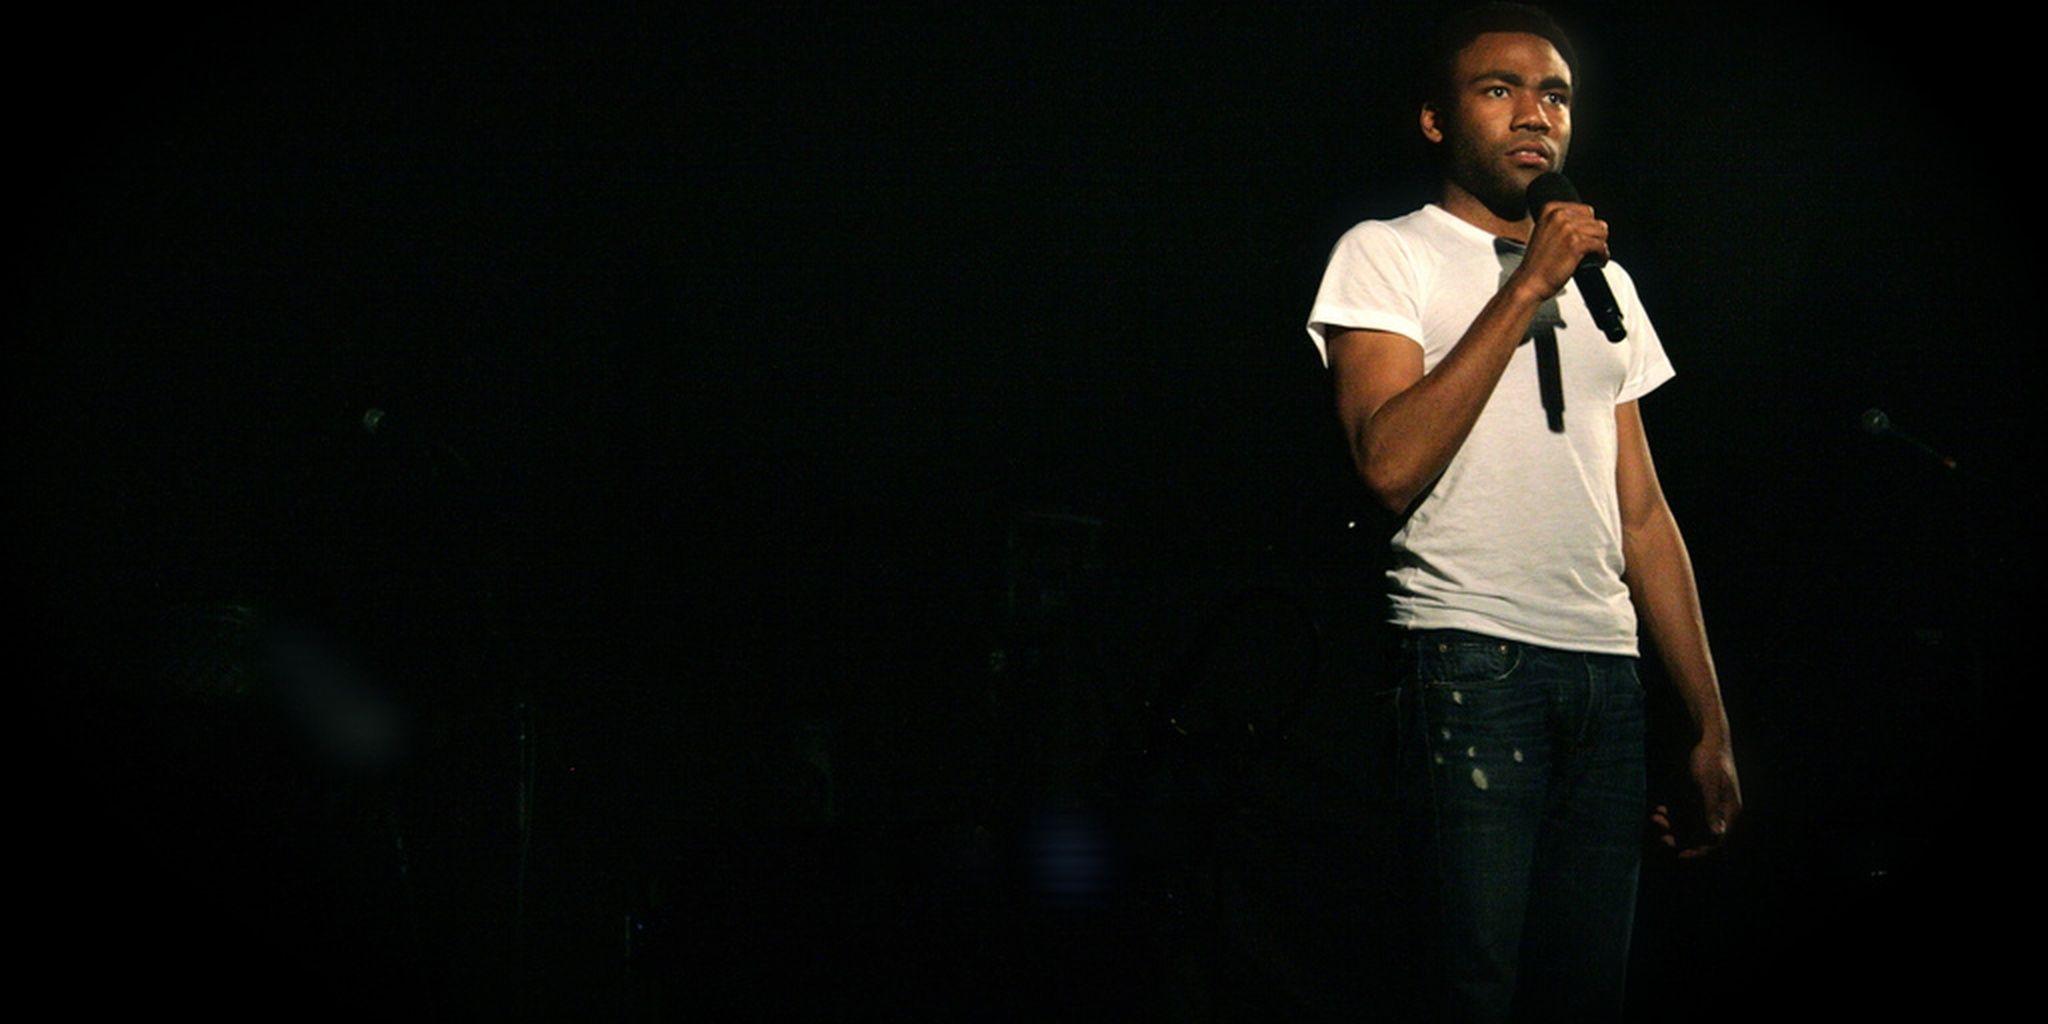 Donald Glover exposes his fears in open letter to Instagram